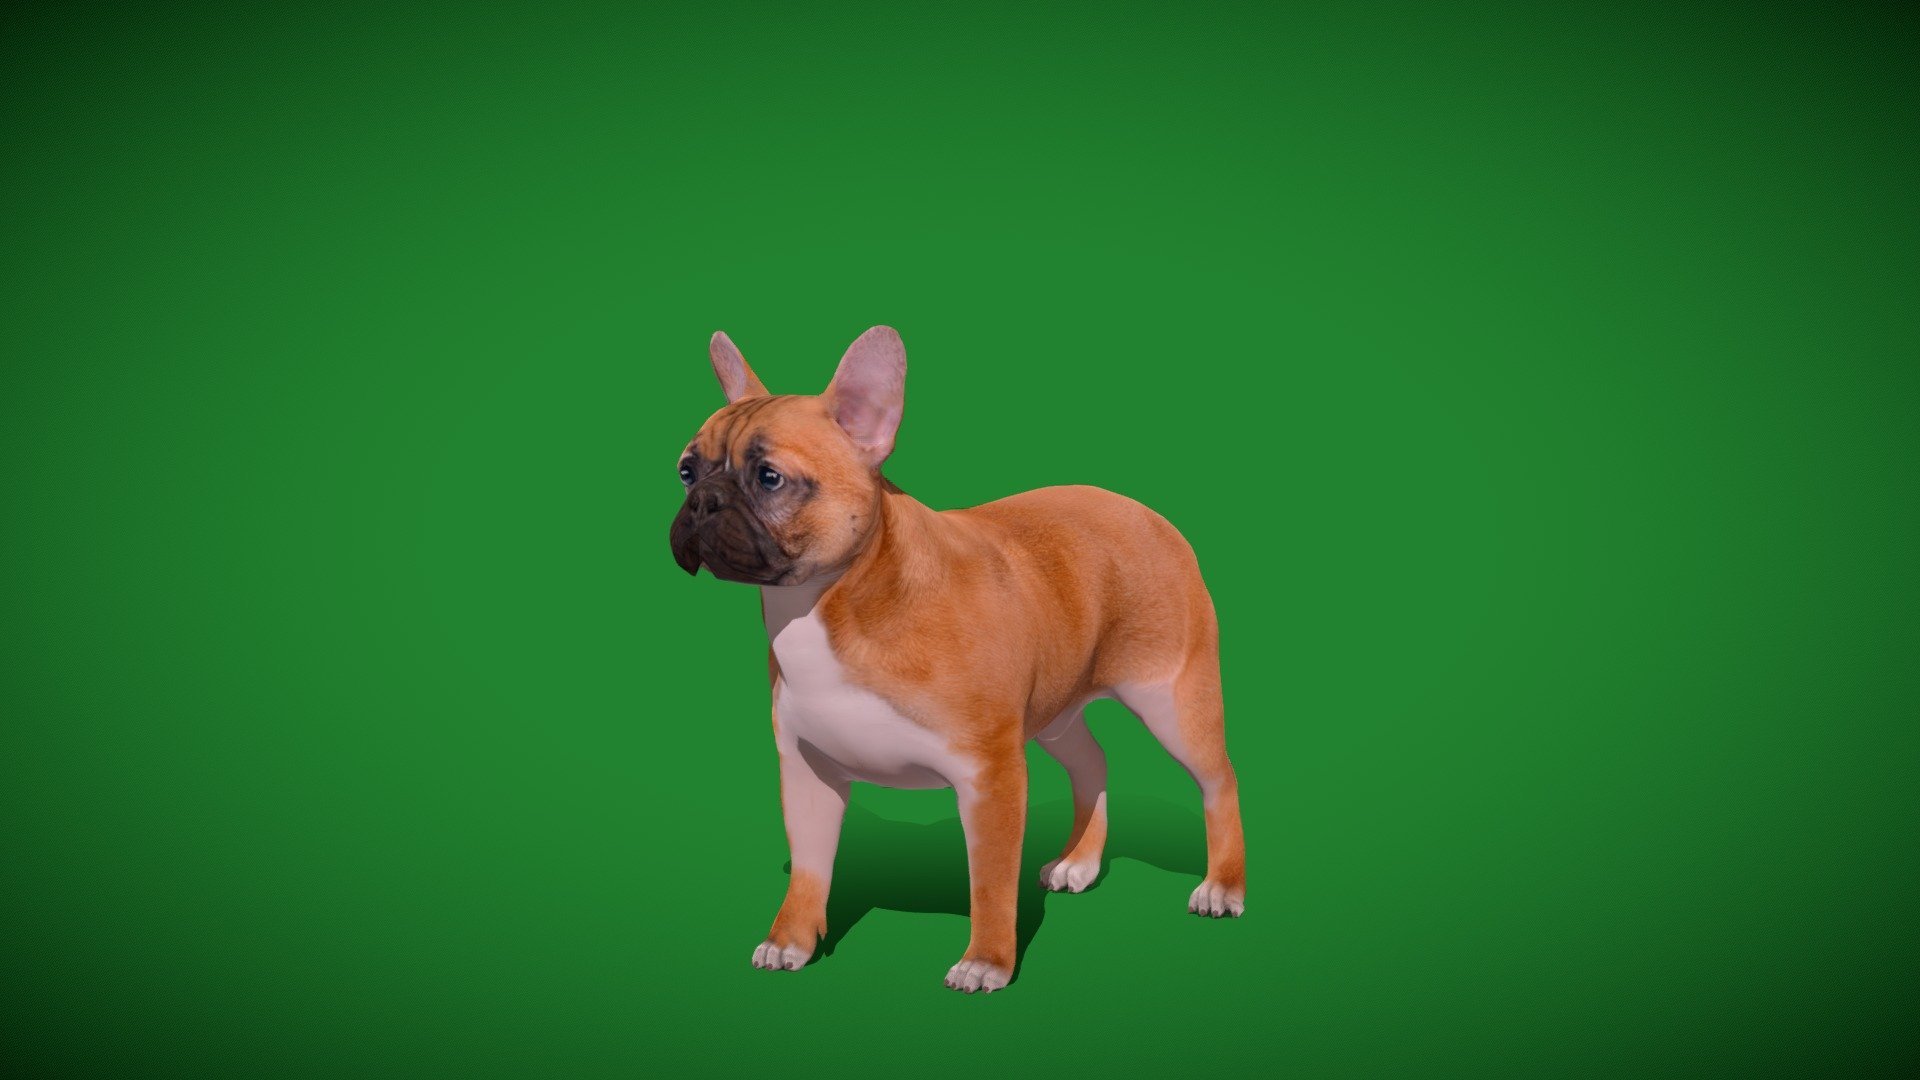 French Bulldog Breed (Bouledogue Français)companion dog,toy dog,Pet,Cute 

Canis Lupis Animal Mammal (cross-breeding)Canine,French Breed

1 Draw Calls

MidPoly

Game Ready (Character)

Subdivision Surface Ready

11- Animations 

4K PBR Textures 1 Material

Unreal/Unity FBX 

Blend File 3.6.5 LTS / 4 Plus

USDZ File (AR Ready). Real Scale Dimension (Xcode ,Reality Composer, Keynote Ready)

Textures Files

GLB File (Unreal 5.1 Plus Native Support,Gadot)


Gltf File ( Spark AR, Lens Studio(SnapChat) , Effector(Tiktok) , Spline, Play Canvas,Omiverse ) Compatible




Triangles -18455



Faces -9849

Edges -19396

Vertices -9603

Diffuse, Metallic, Roughness , Normal Map ,Specular Map,AO


The French Bulldog, French: Bouledogue Français, is a French breed of companion dog or toy dog. It appeared in Paris in the mid-nineteenth century, apparently the result of cross-breeding of Toy Bulldogs imported from England and local Parisian ratters 3d model